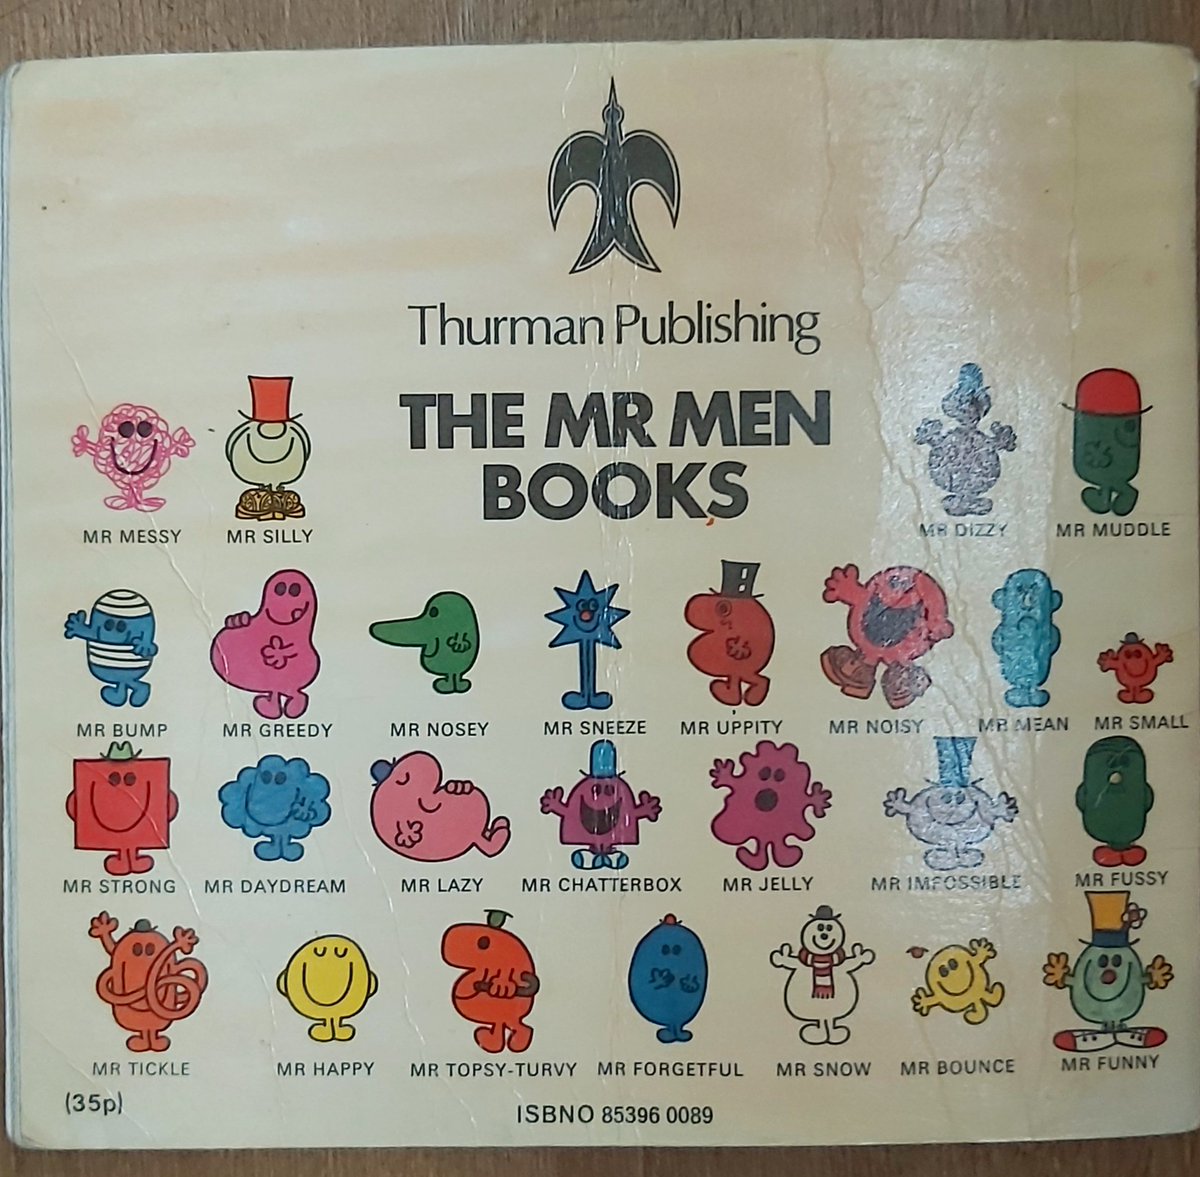 It all started with Mr Tickle, in 1971. By the mid-seventies, Roger Hargreaves' Mr Men books were ubiquitous. The Little Miss collection followed in 1981, while Hargreaves also penned the animal book series, Timbuctoo, in 1978. (Mr Small was Margaret's favourite, naturally.)